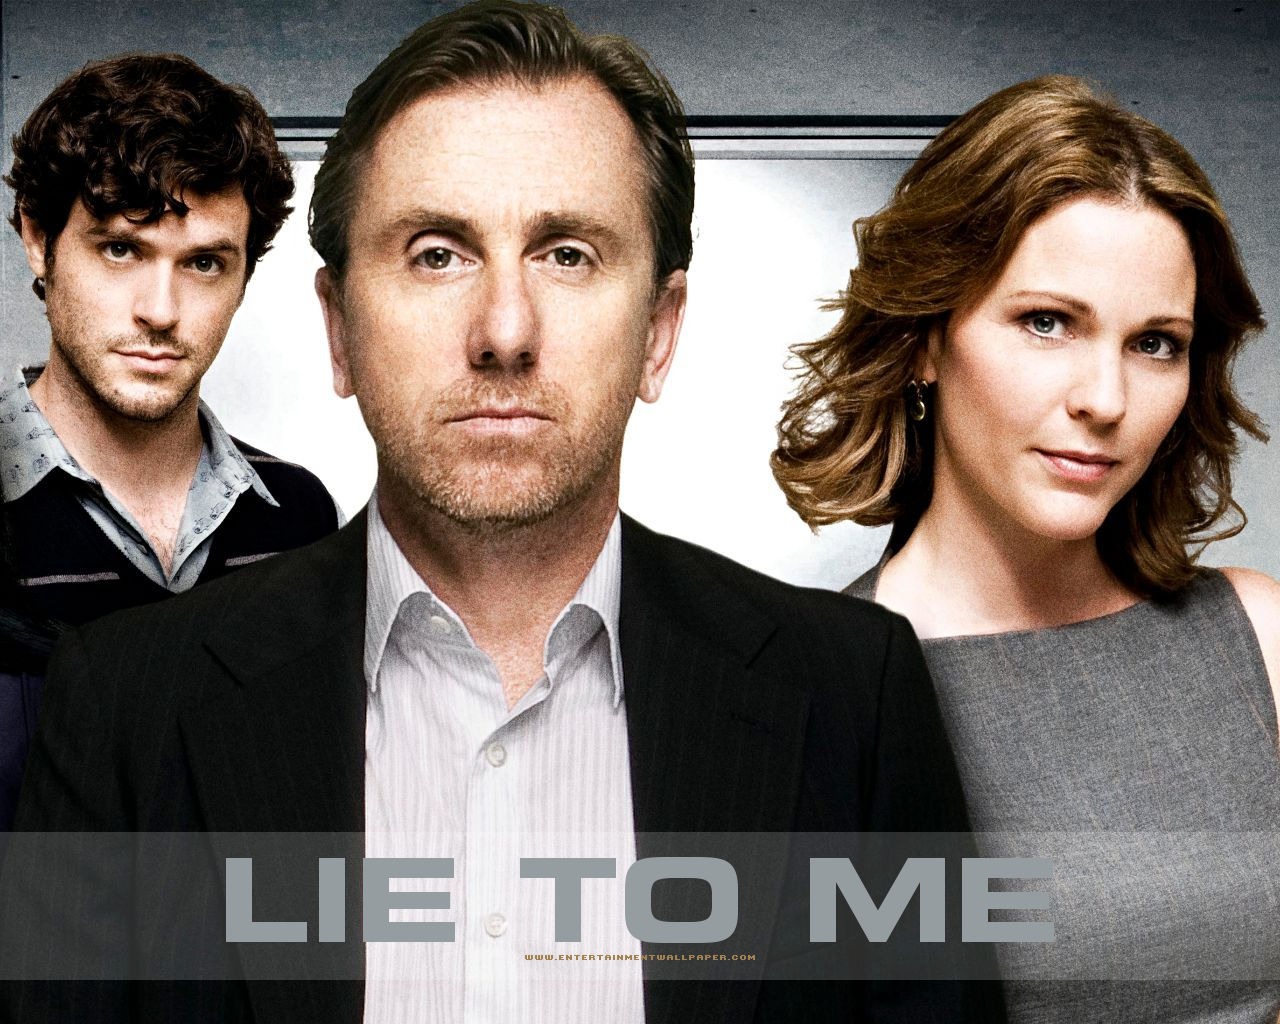 Lie to me movie wallpapers #1 - 1280x1024